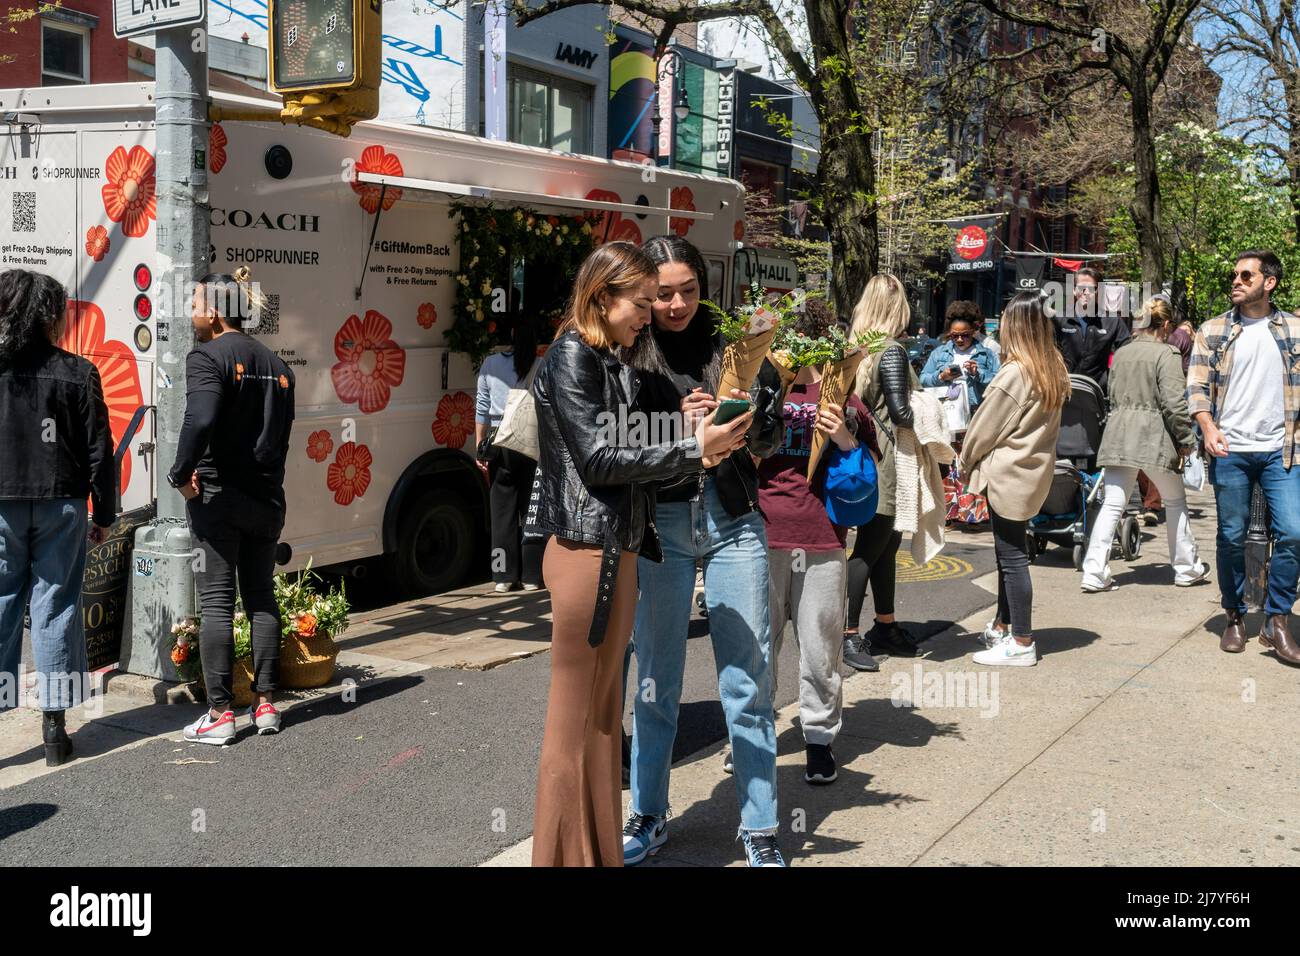 Women with their coveted flowers after waiting on line to receive a free bouquet from Coach, in Soho in New York on Saturday, April 30, 2022. The brand activation, fueled by social media, was a promotion for the collaboration of Coach and ShopRunner to provide free shipping. (© Richard B. Levine) Stock Photo